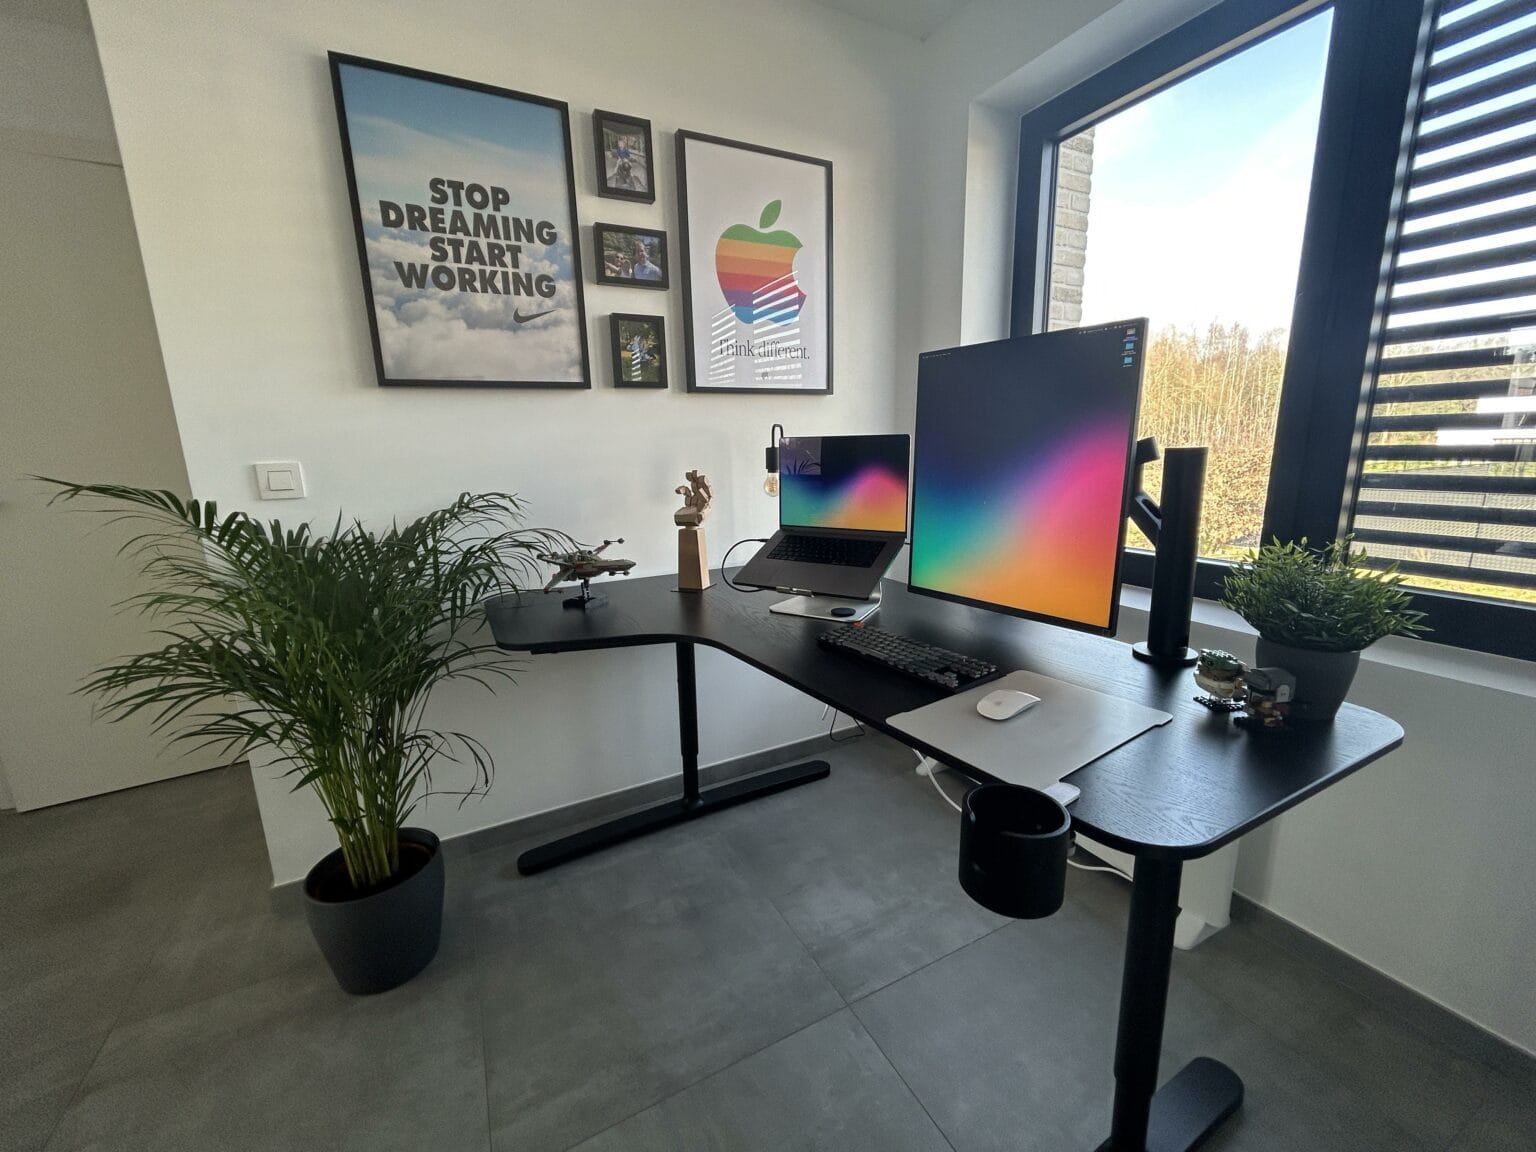 Another oddly shaped LG DualUp monitor finds a home in a Mac setup.